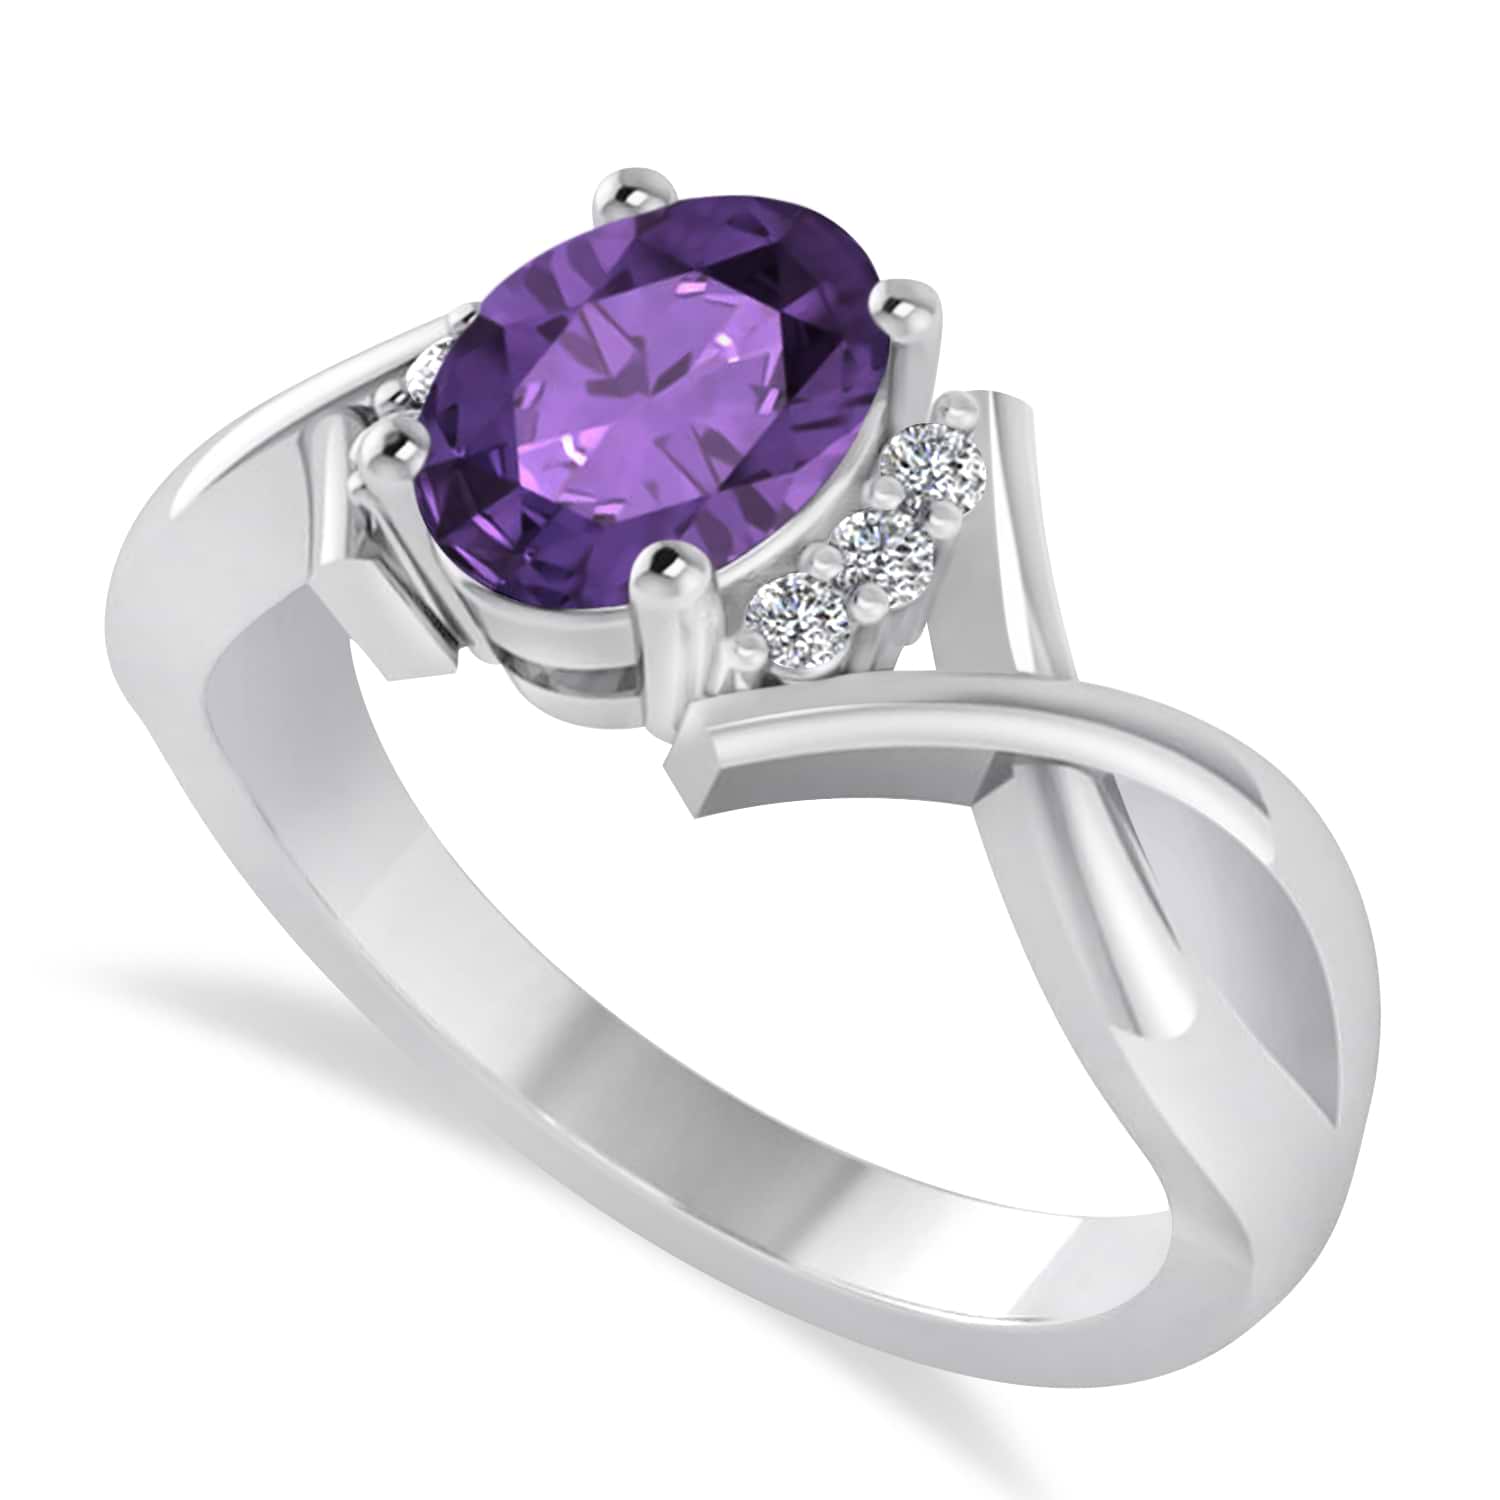 Oval Cut Amethyst & Diamond Engagement Ring With Split Shank 14k White Gold (1.69ct)